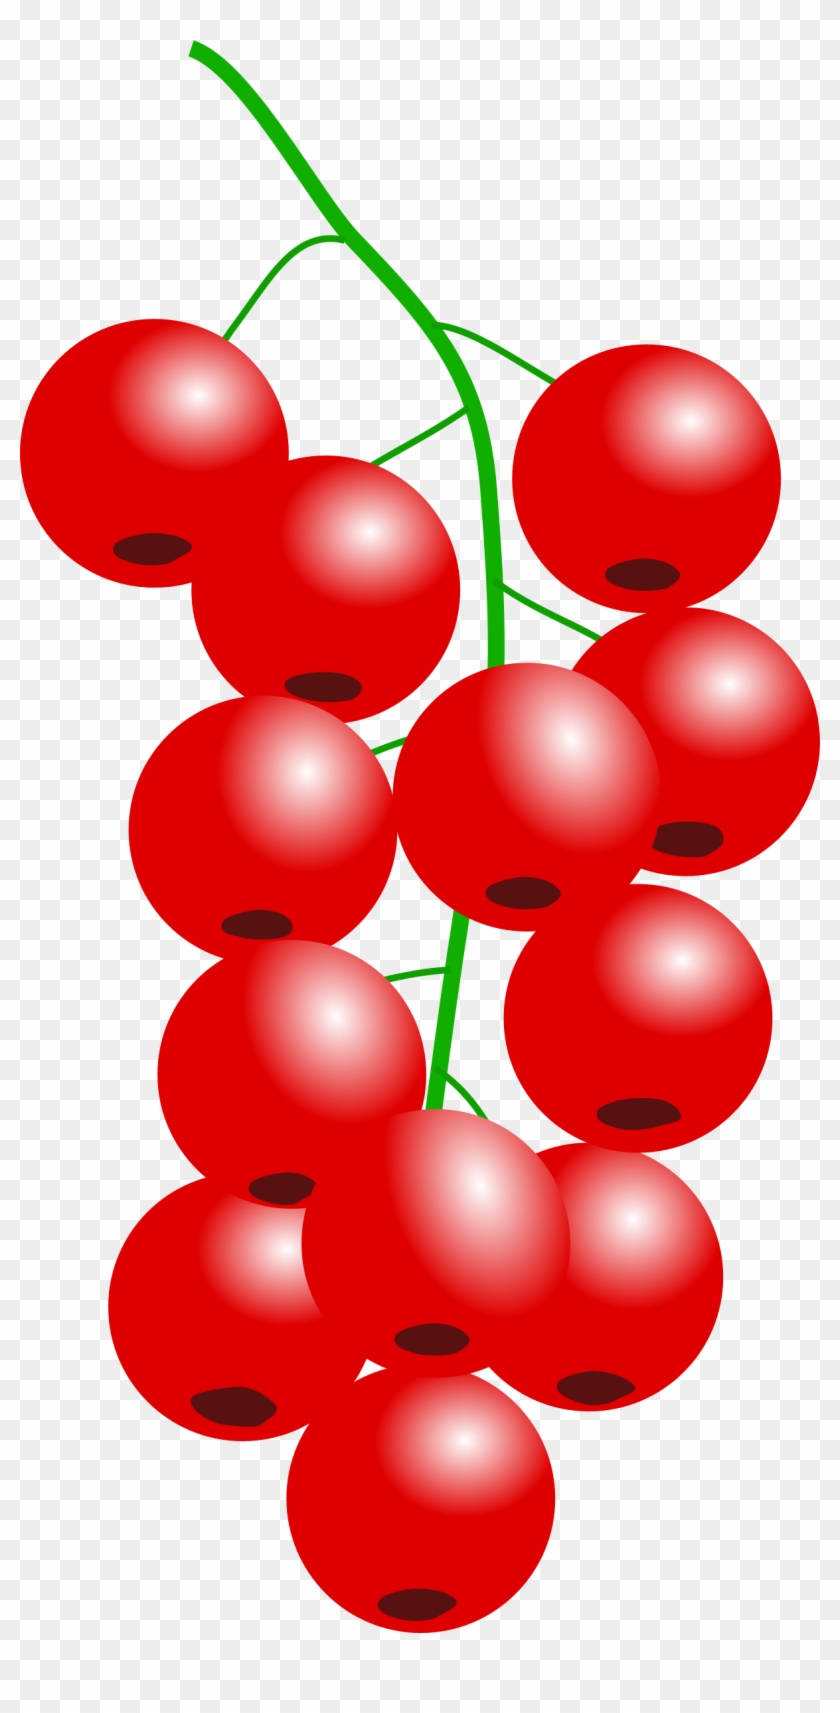 This Free Icons Png Design Of Redcurrant Png - Red Fruits Clip Art Transparent Png #376233